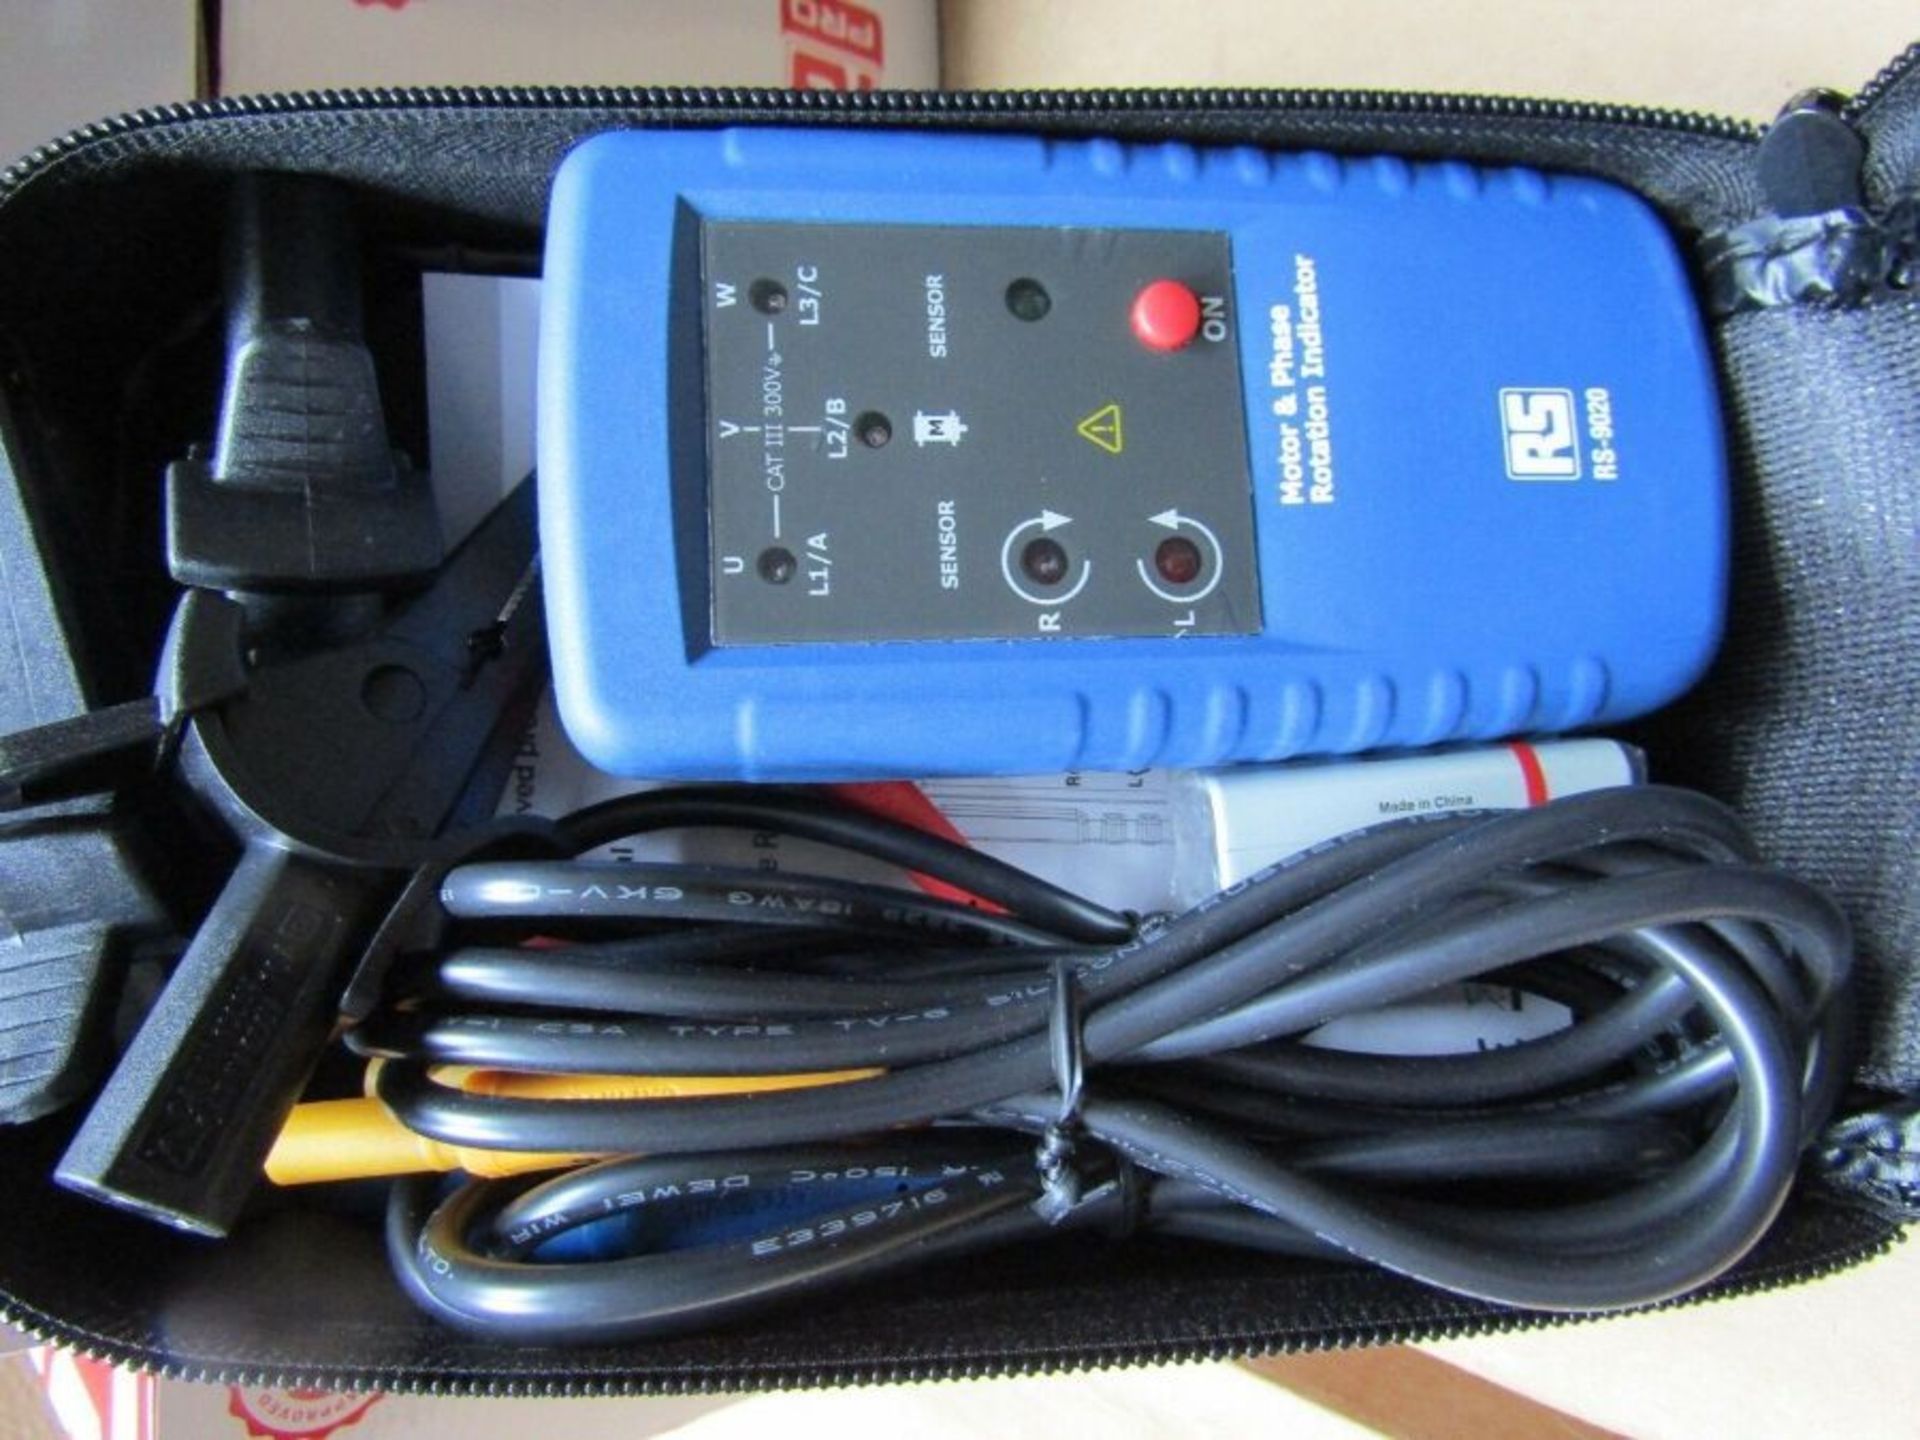 NEW RS Pro DT-902 Phase Rotation Tester CAT III 300V 400Hz 400Vac S4 8937919 - Image 3 of 4